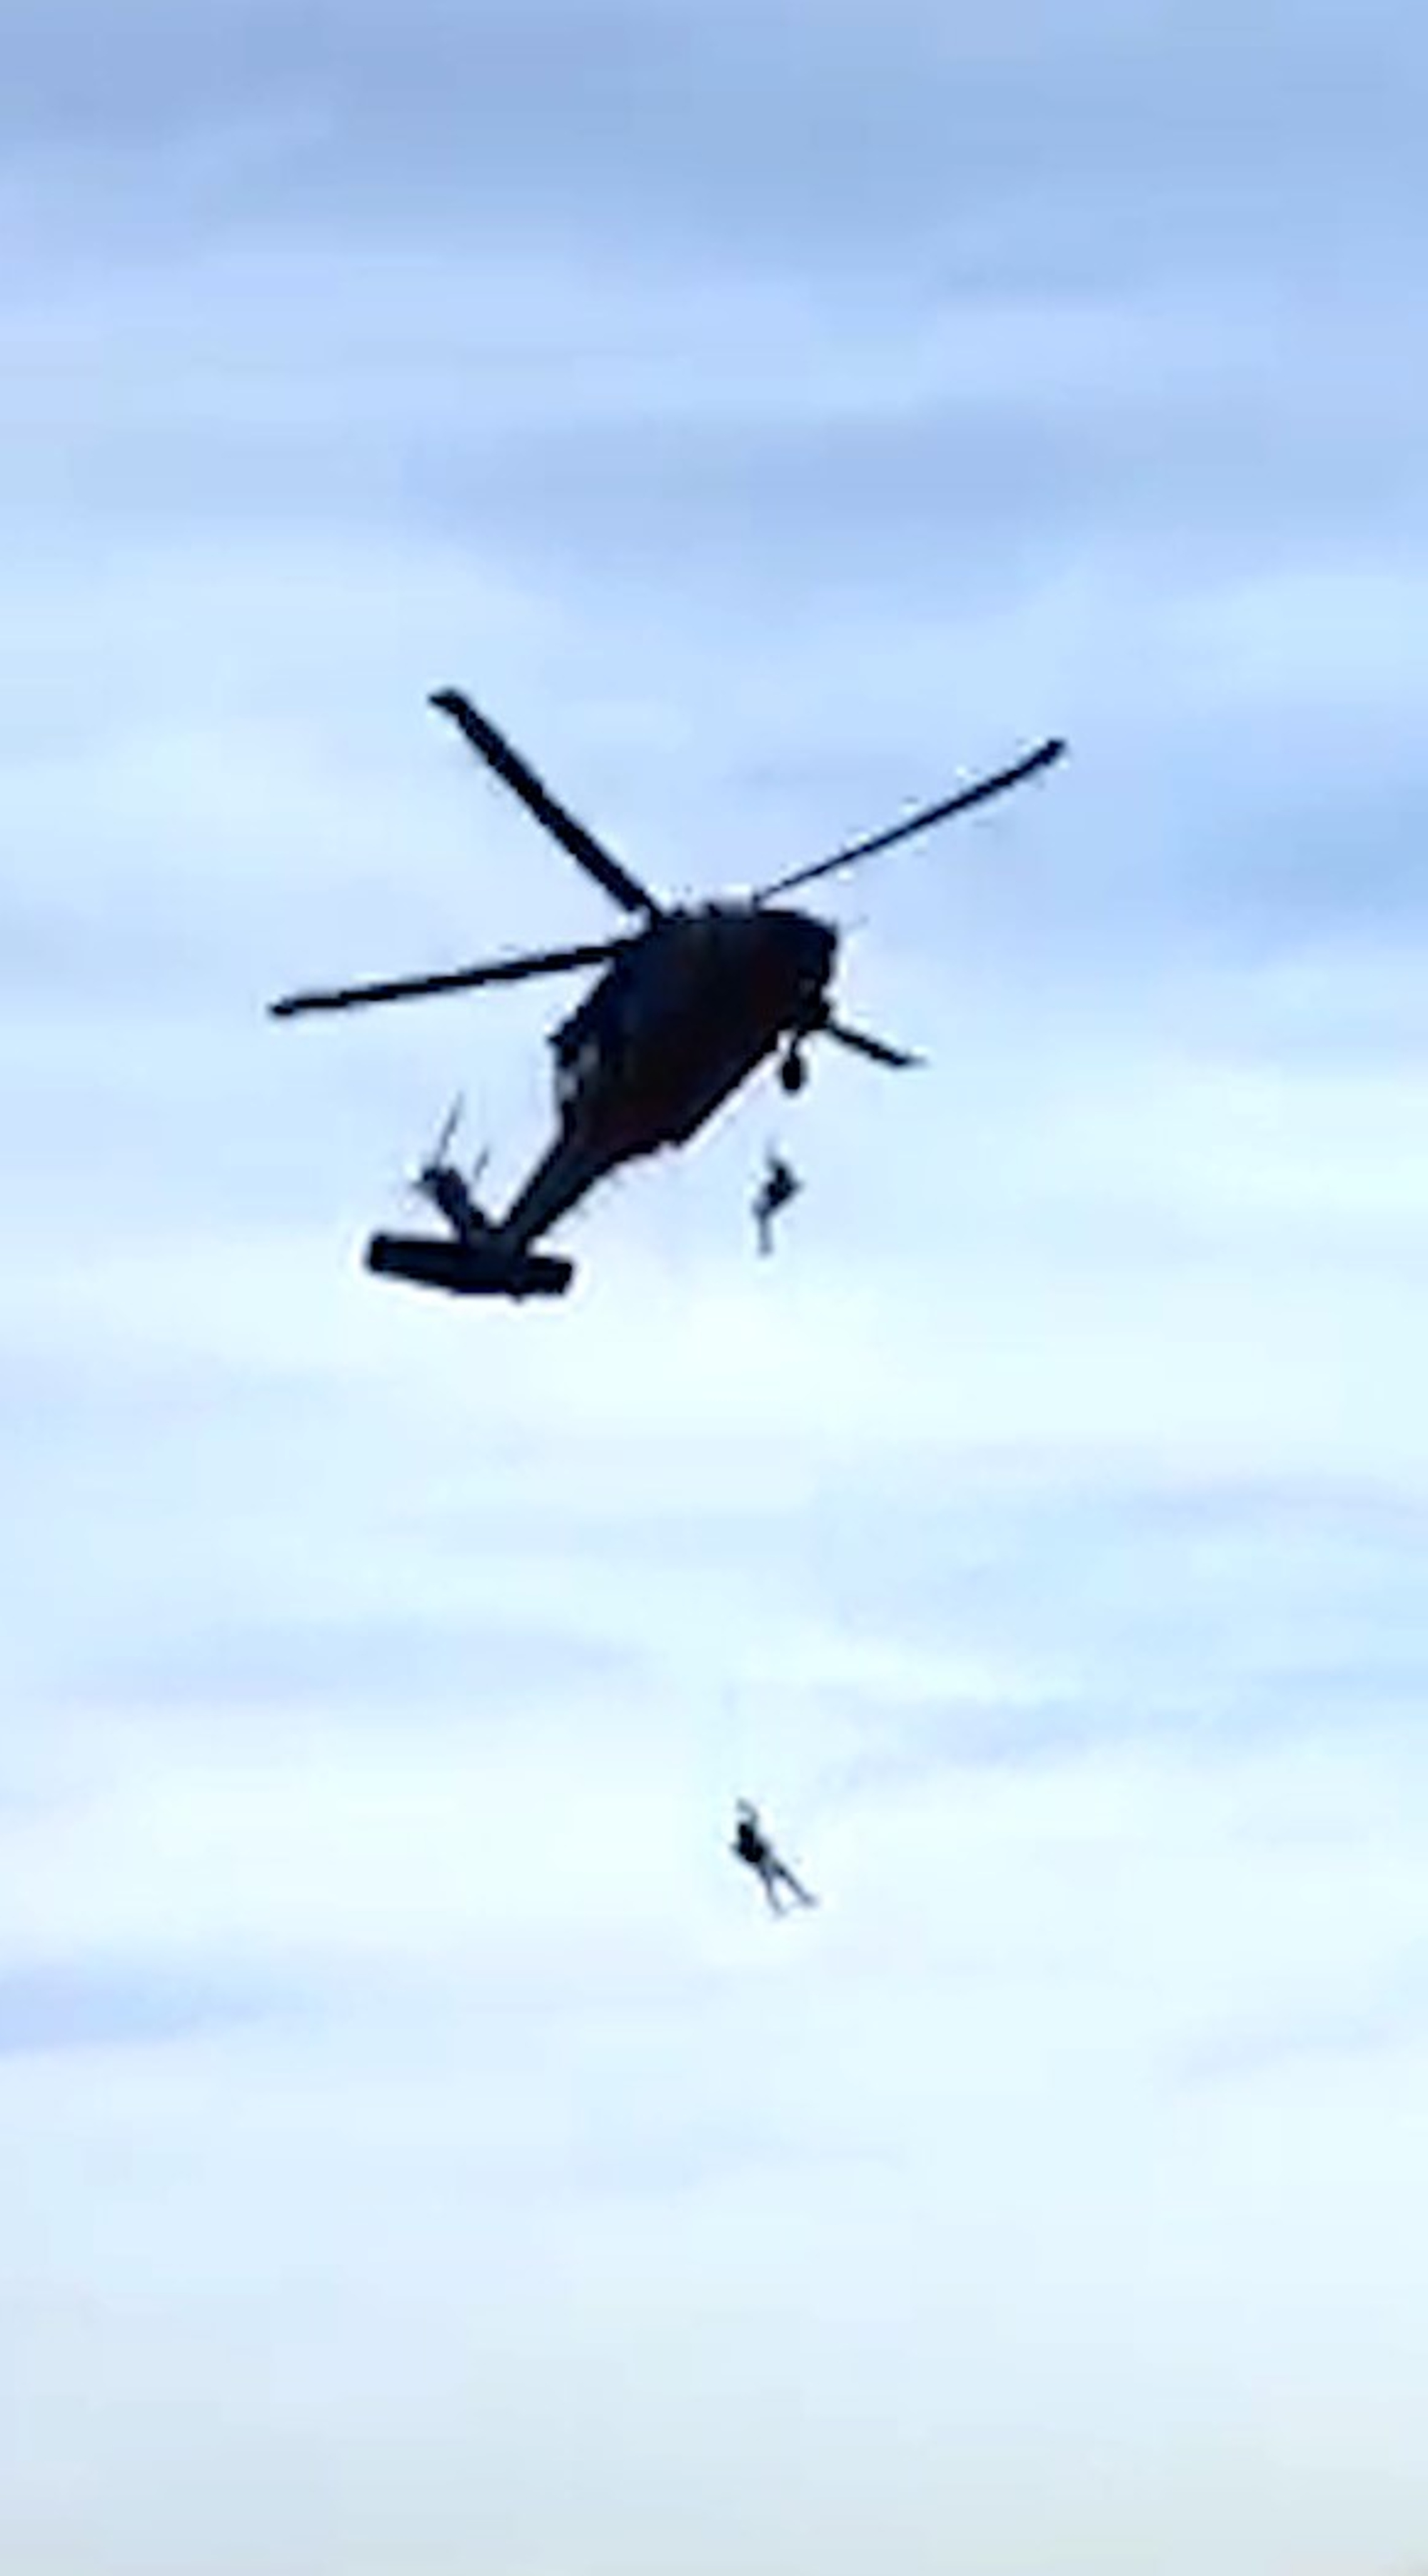 Read more about the article Abseiling Commando Falls From Helicopter In Exercise